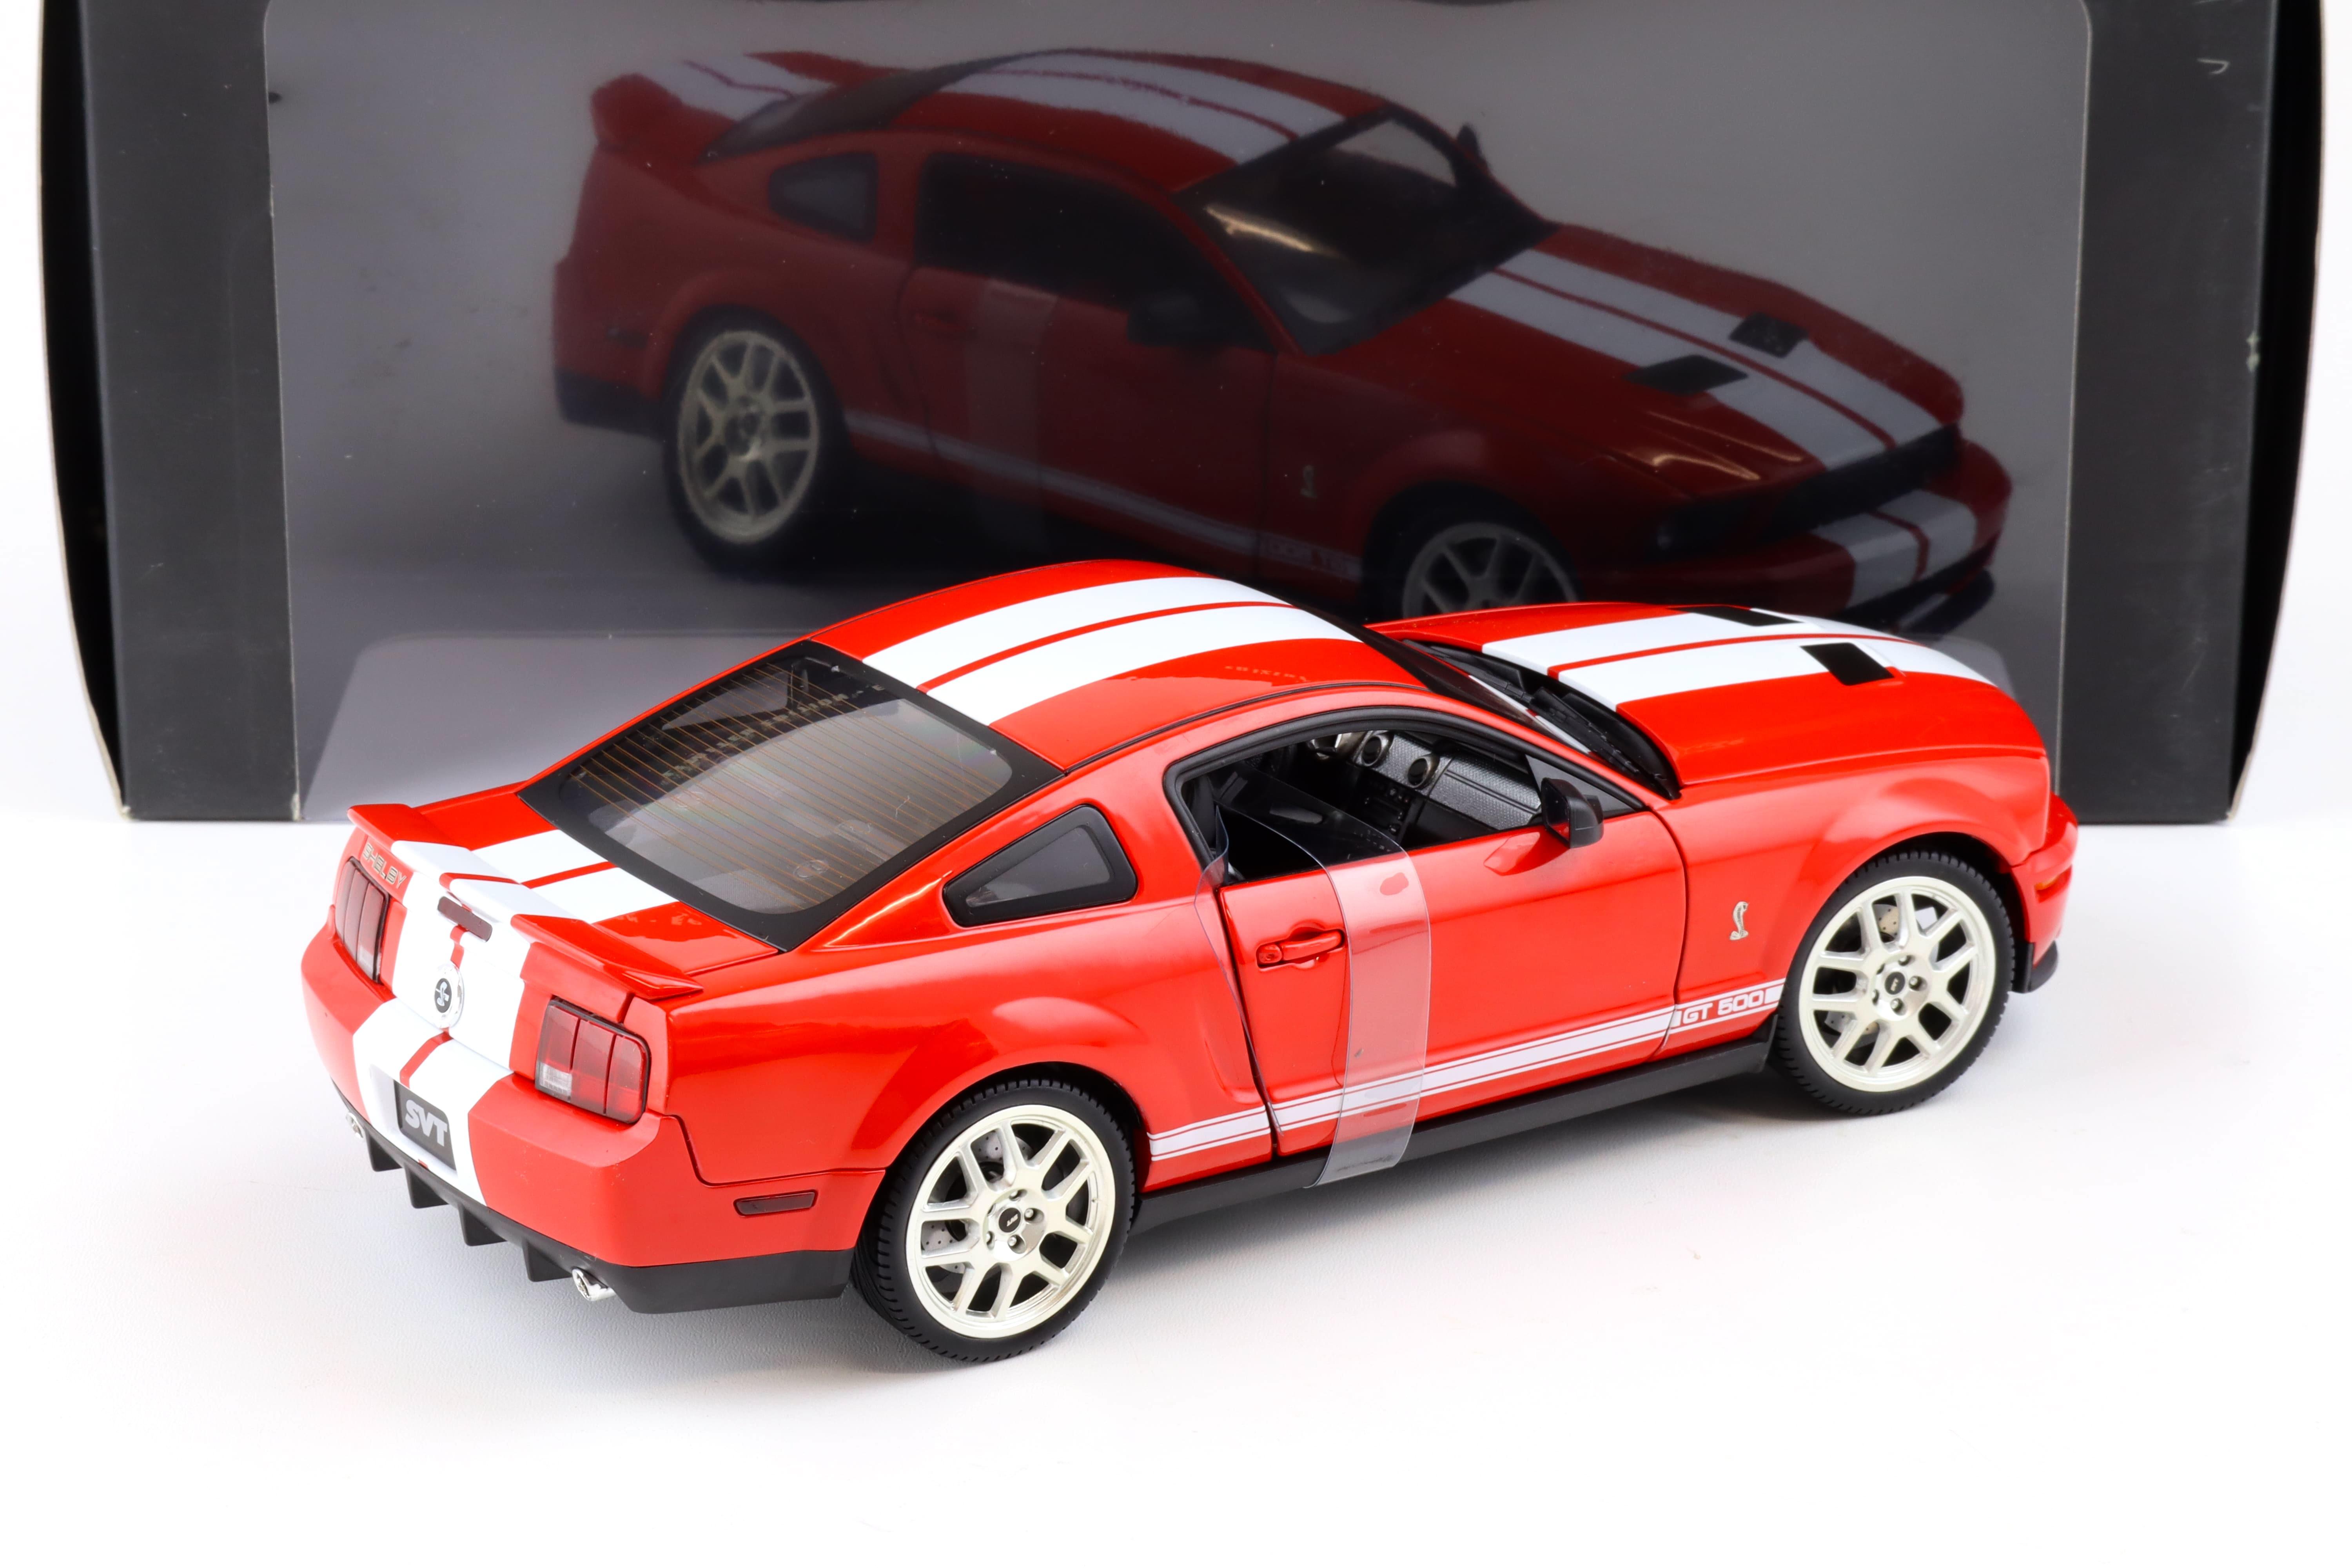 1:18 Hot Wheels Elite 2007 Shelby GT500 Coupe red/ white stripes